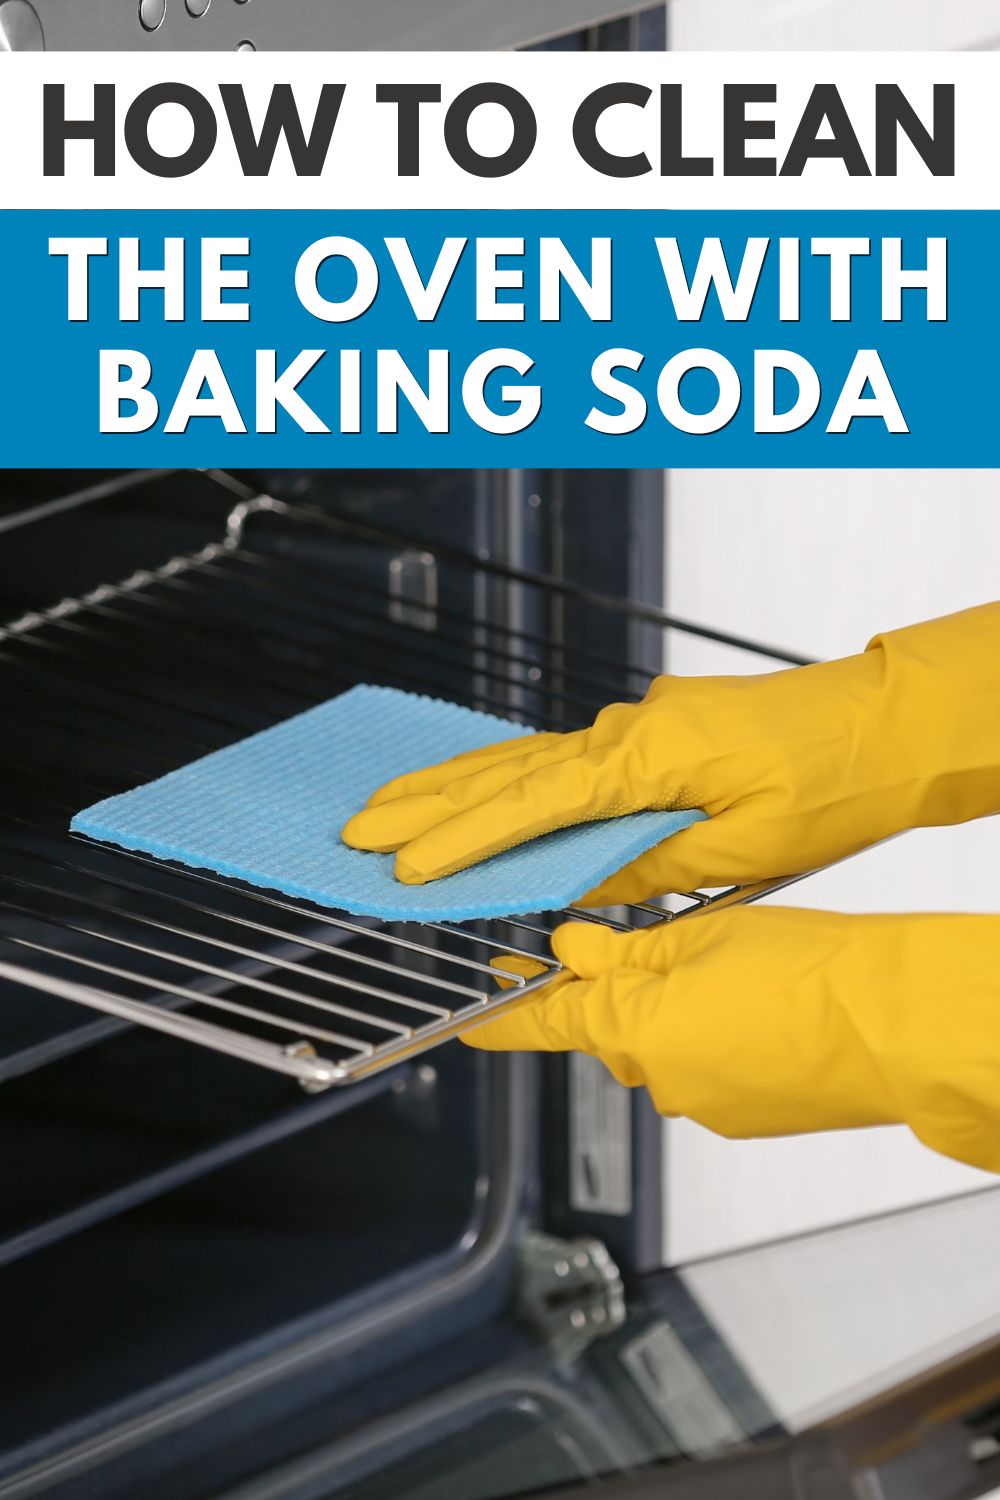 Gloved hands cleaning oven rack using cloth with text  "How to clean the oven with baking soda".